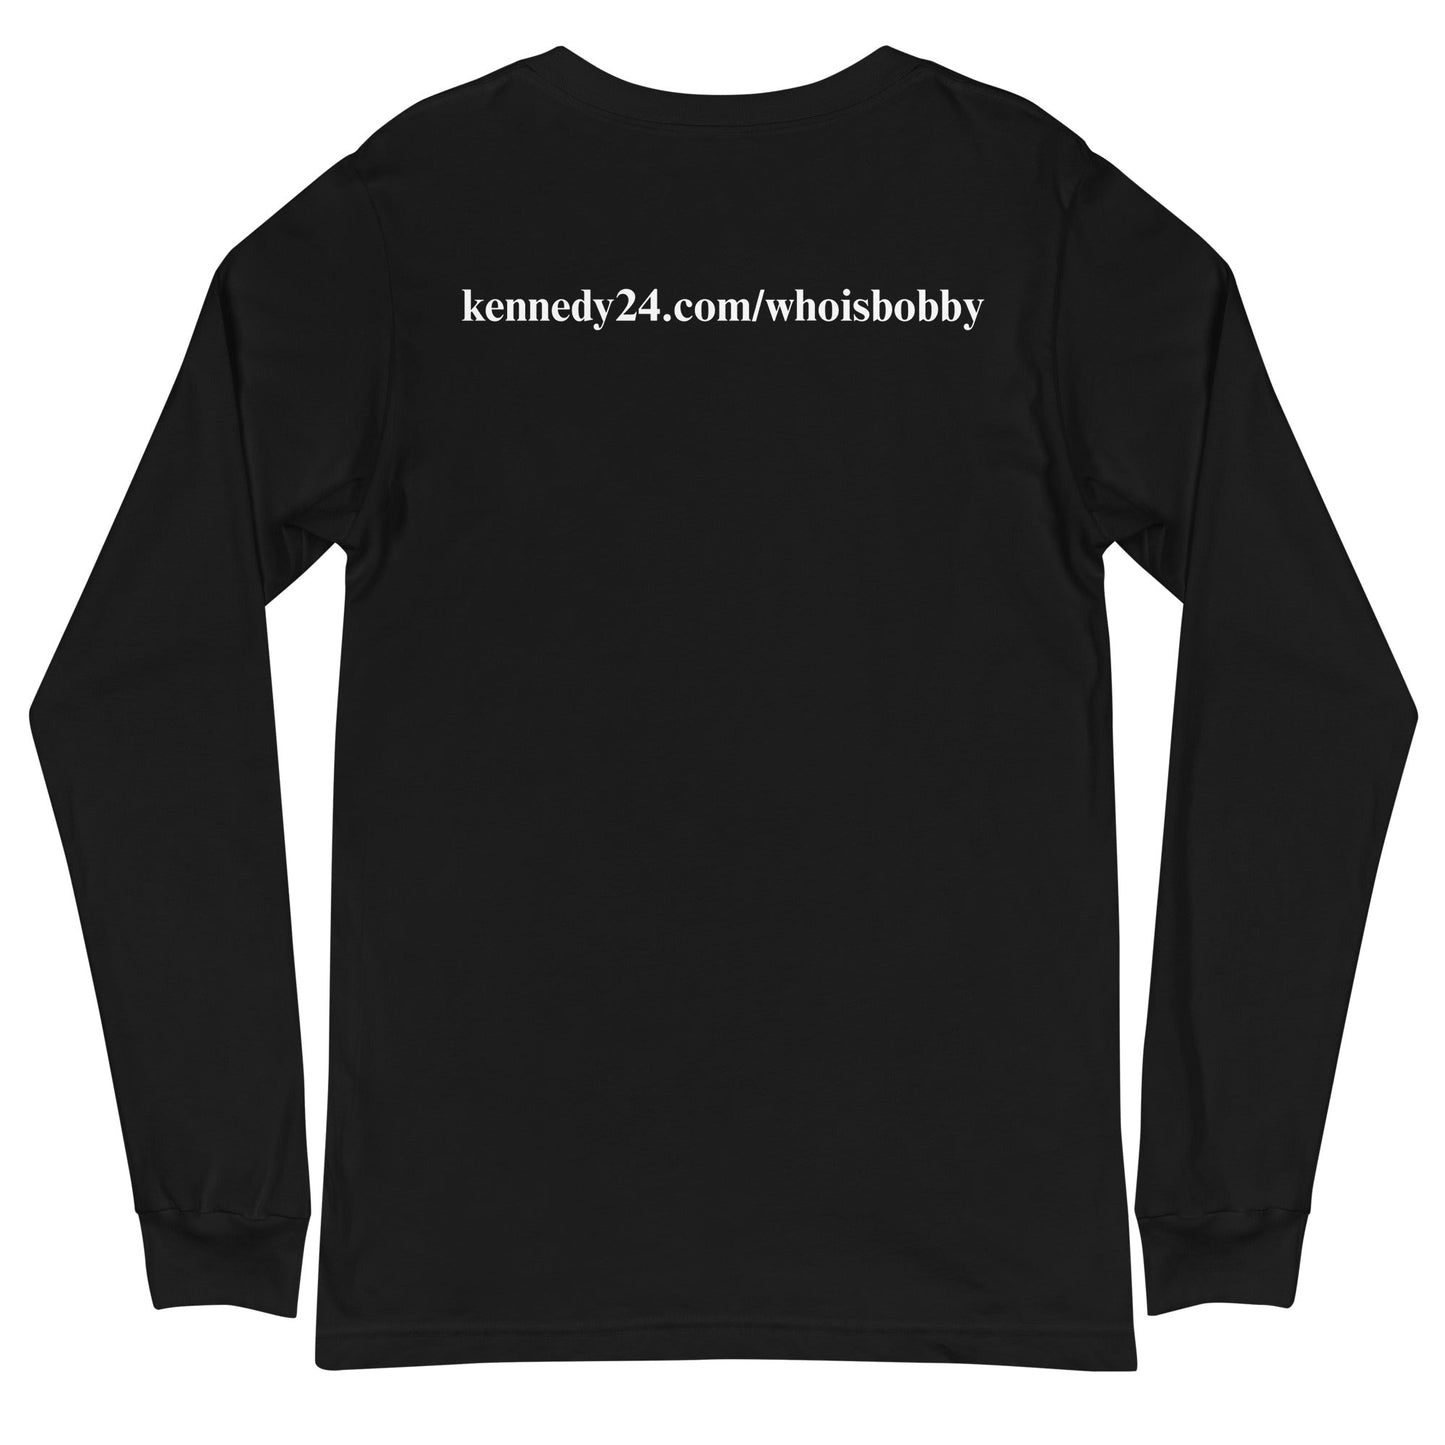 Who is RFK Jr? Unisex Long Sleeve Tee - TEAM KENNEDY. All rights reserved